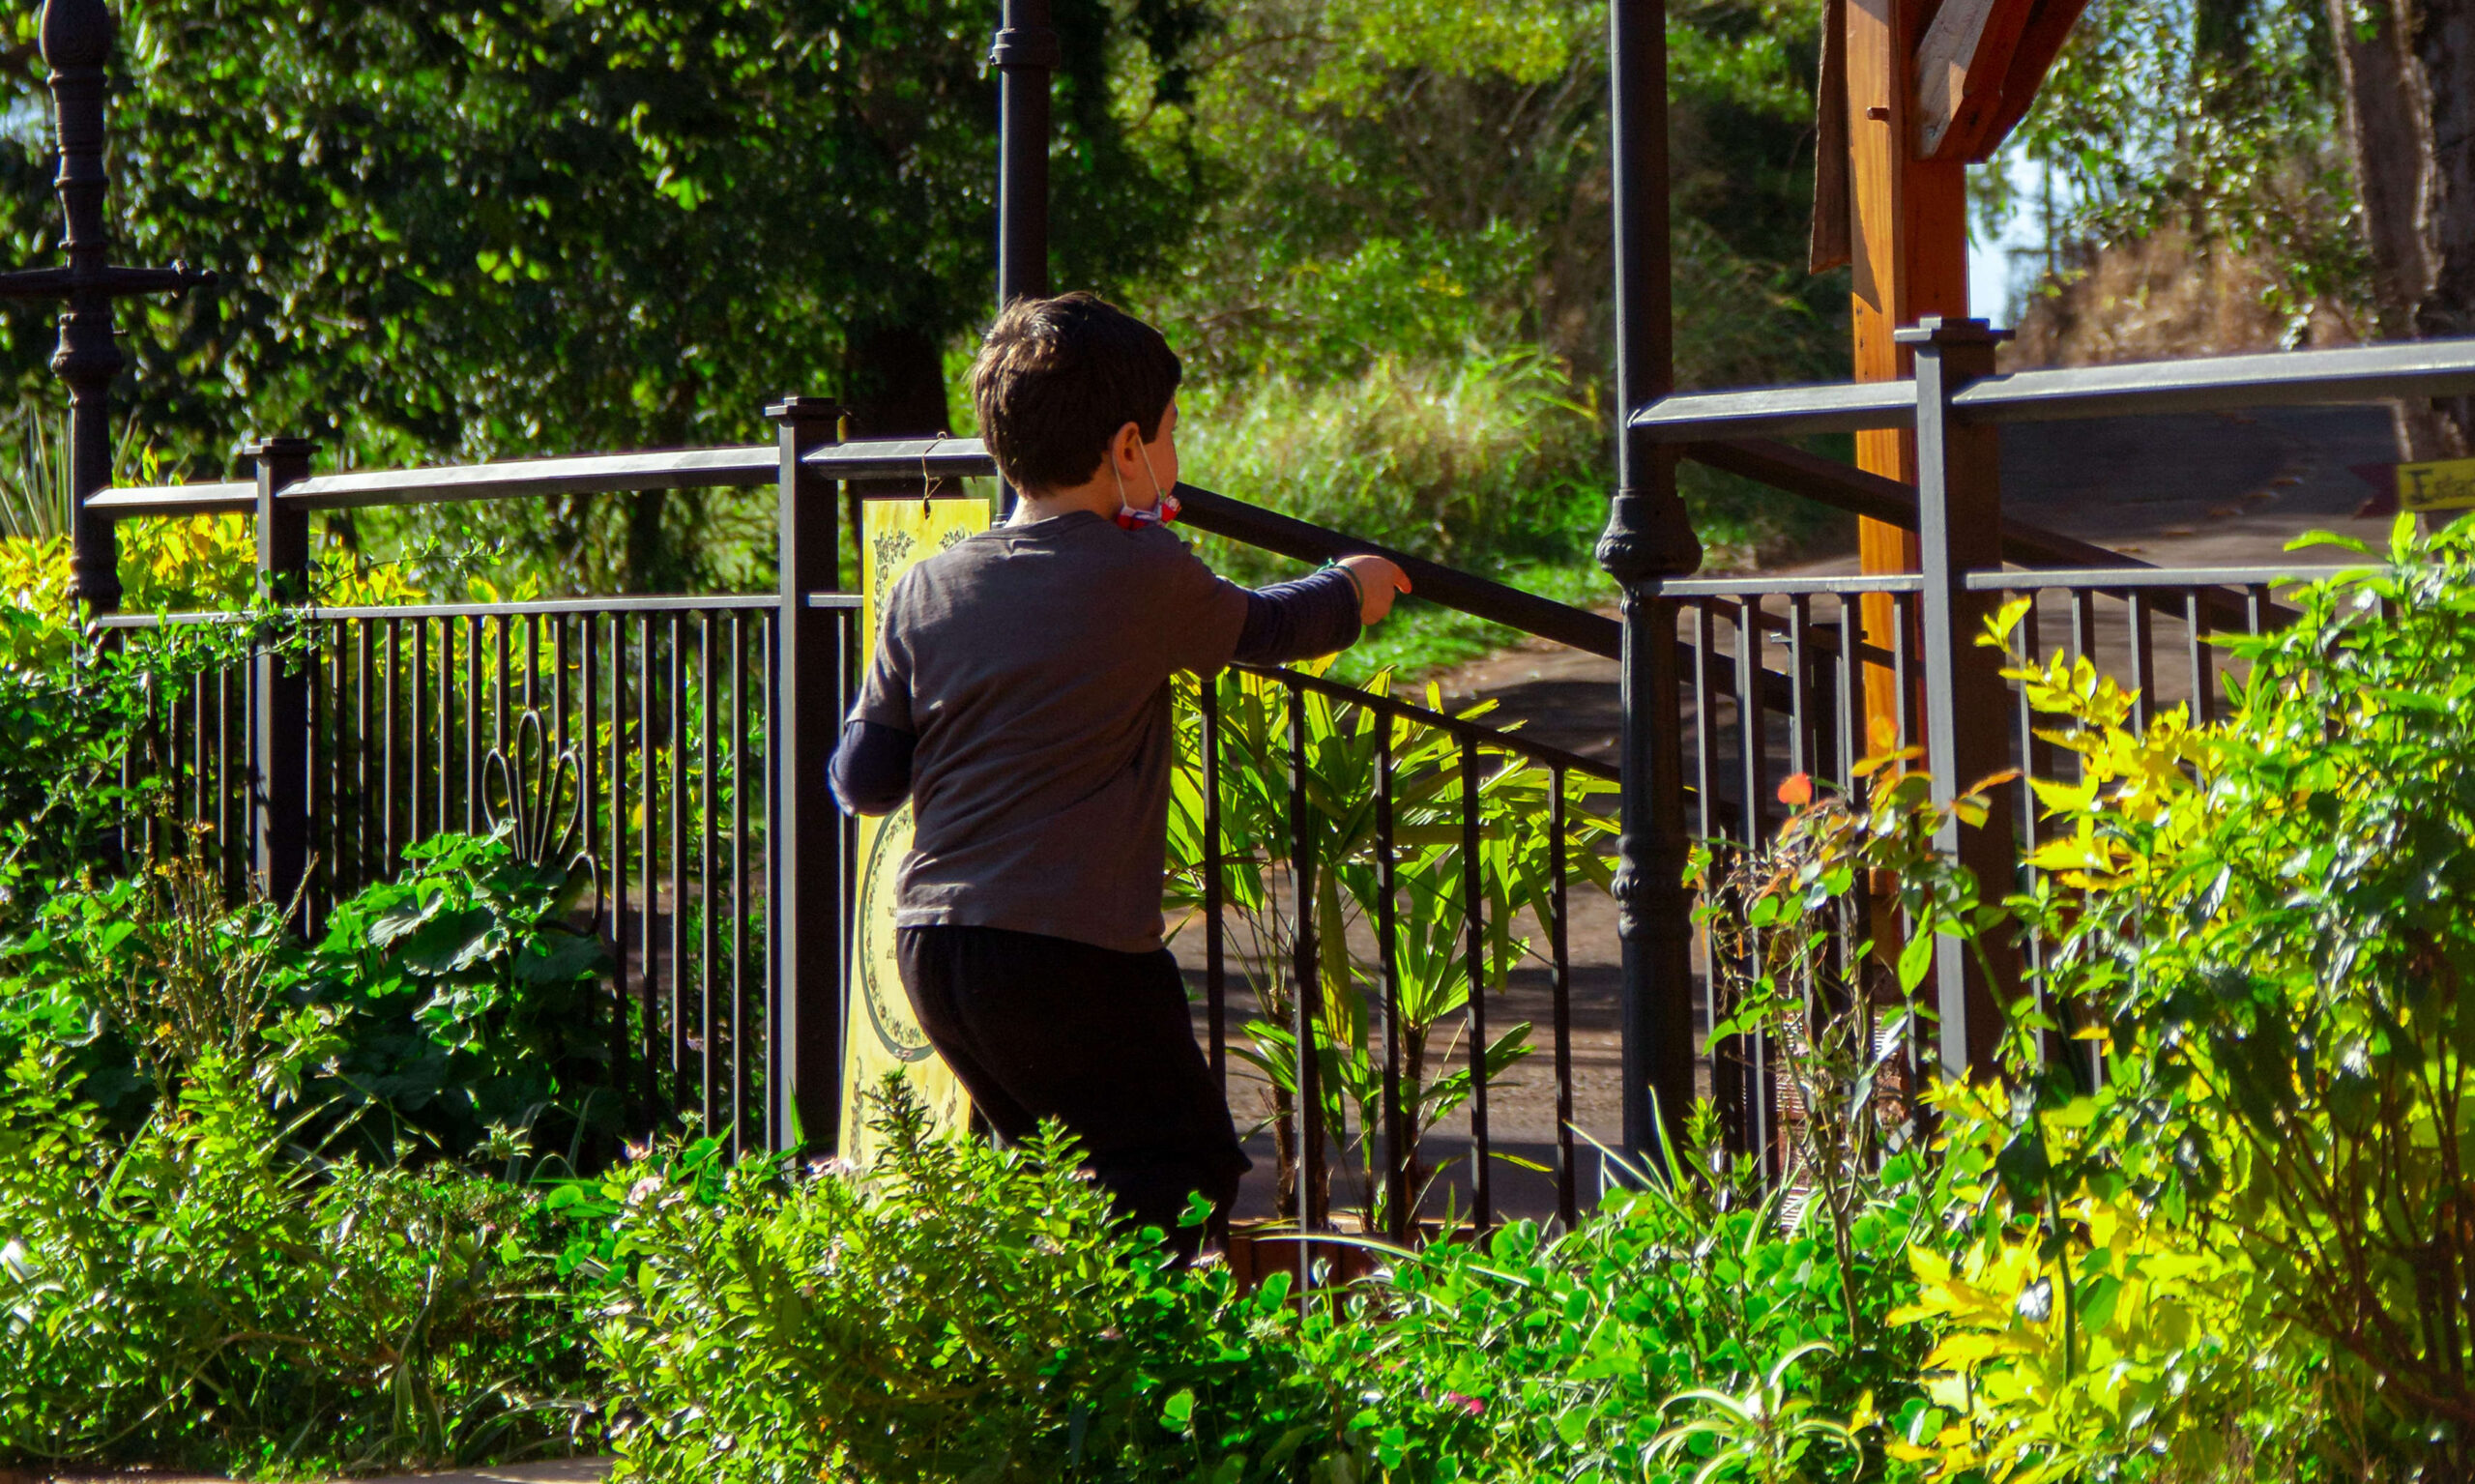 a child outside at a gate